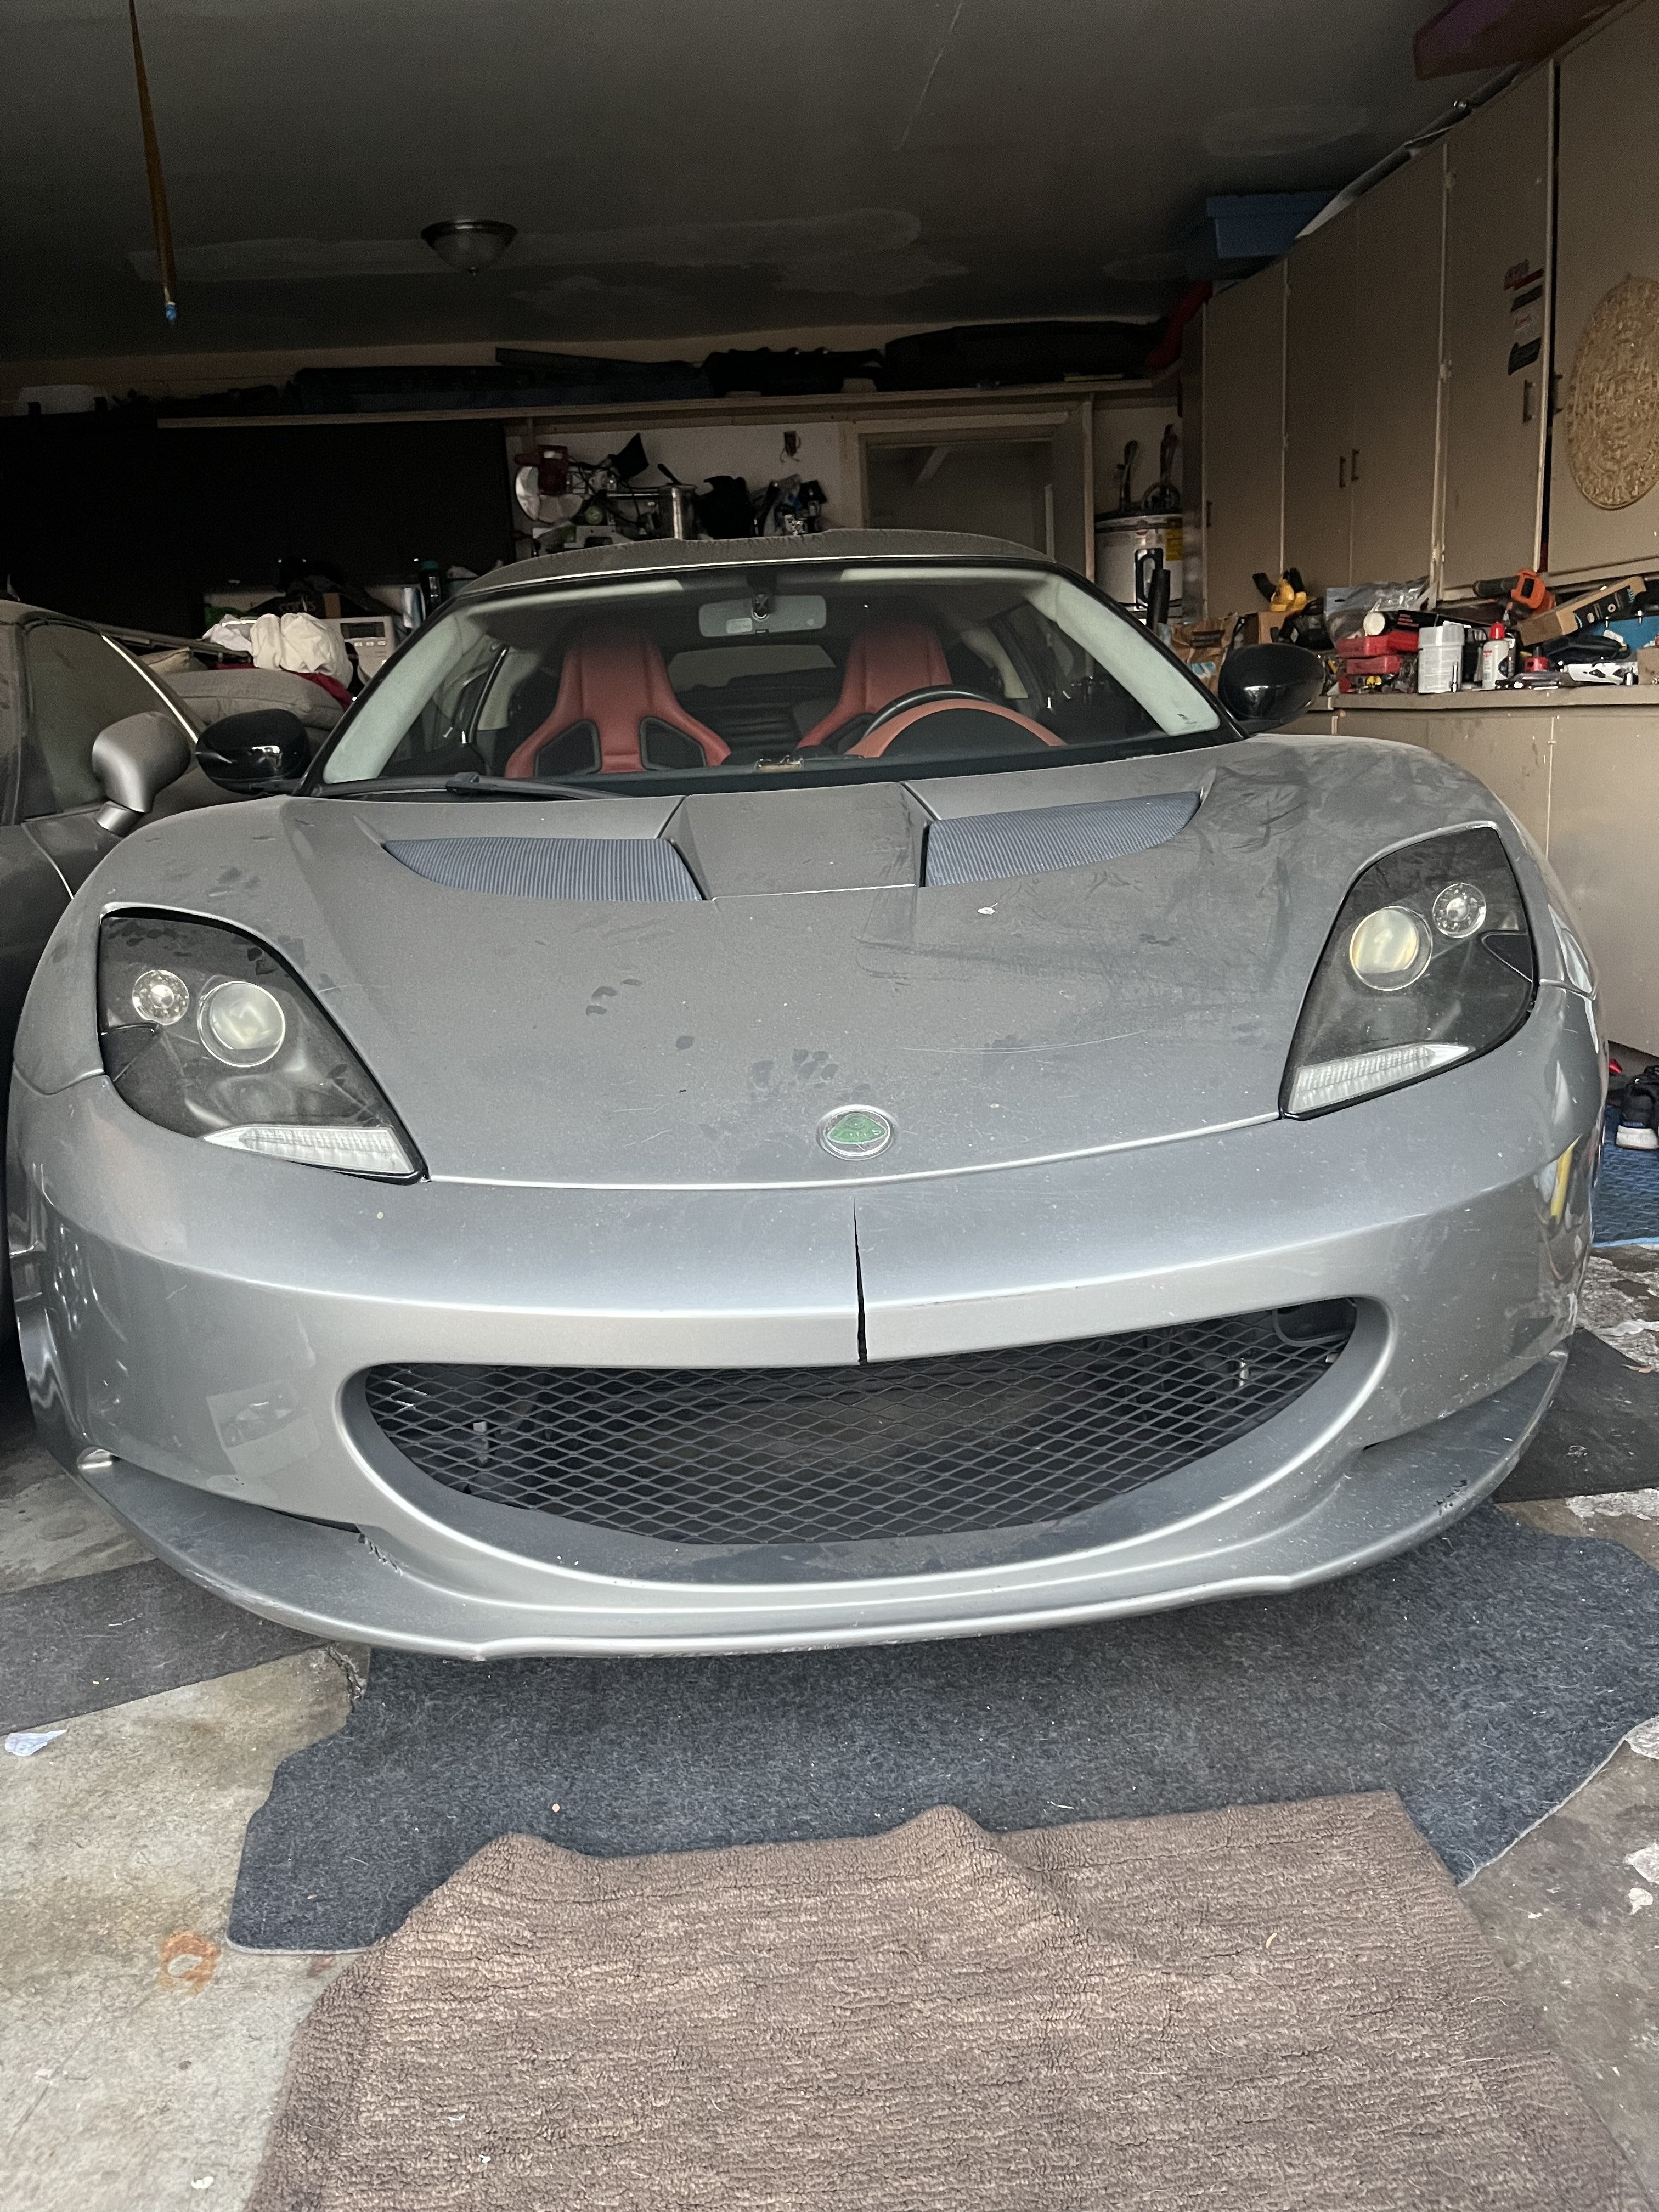 Ideas for cracked bumper top section | The Lotus Cars Community